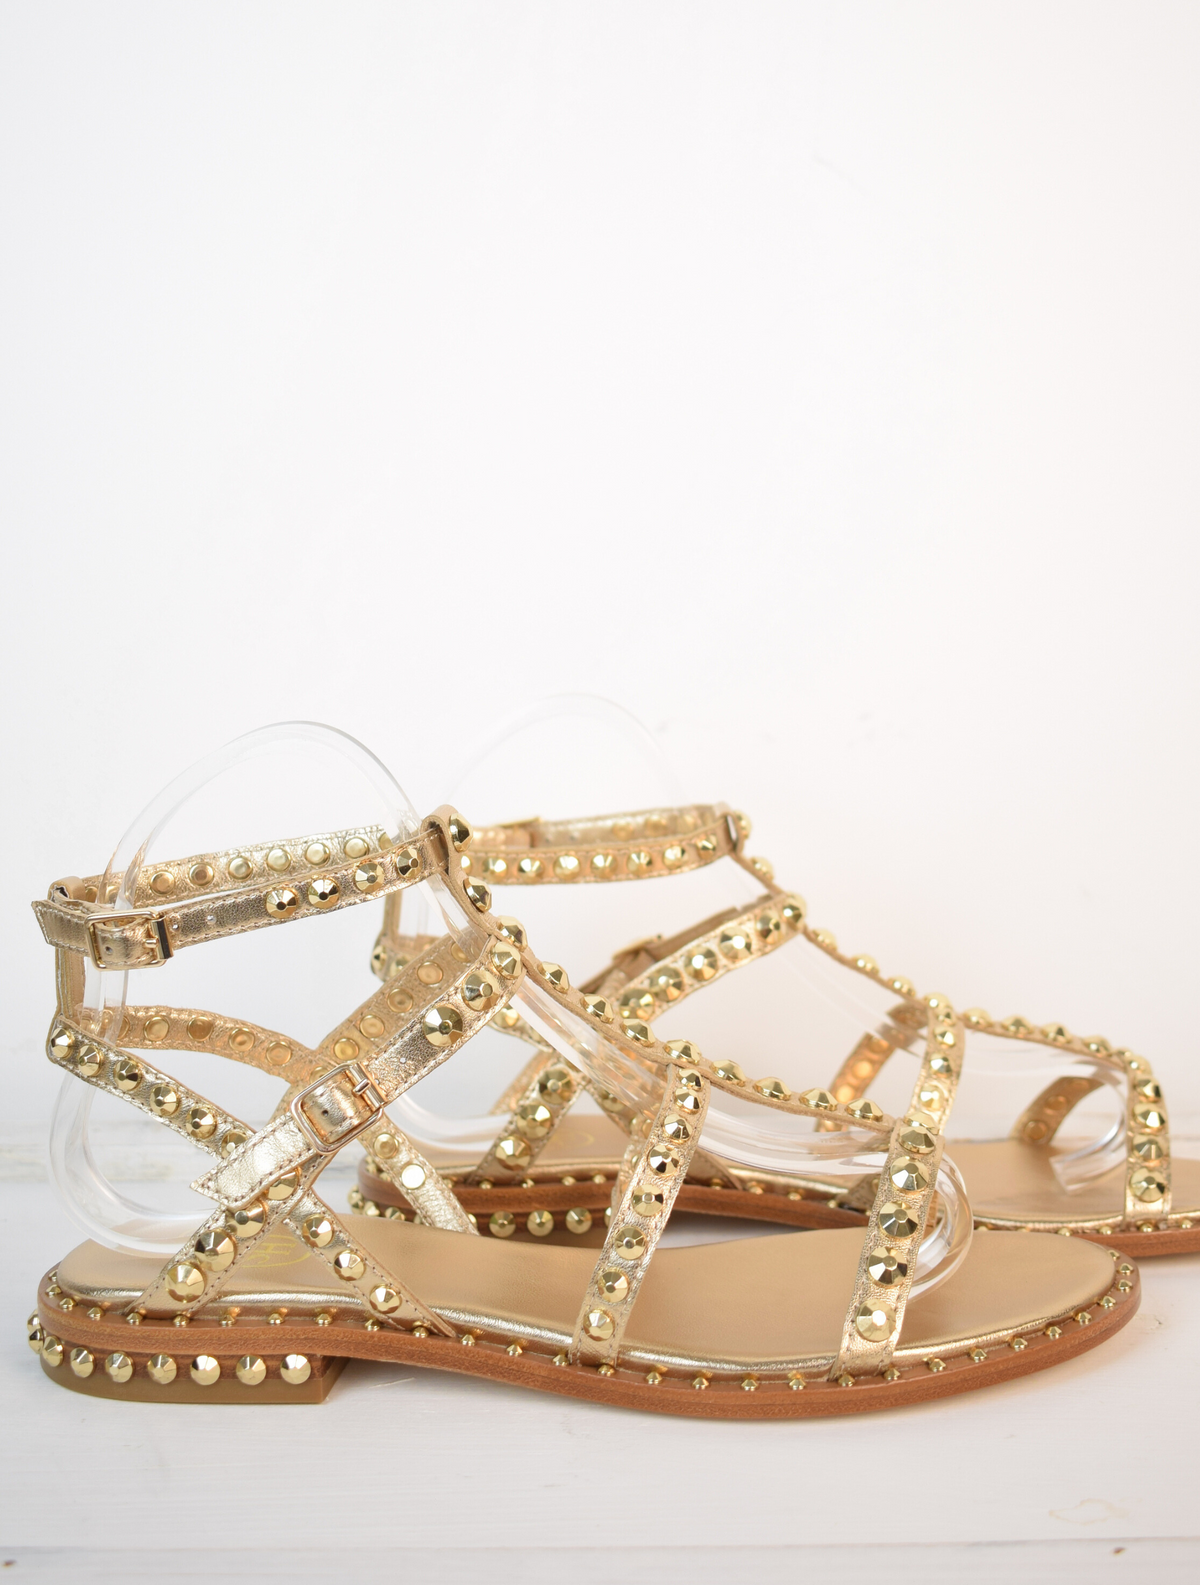 Gladiator sandle with gold studs